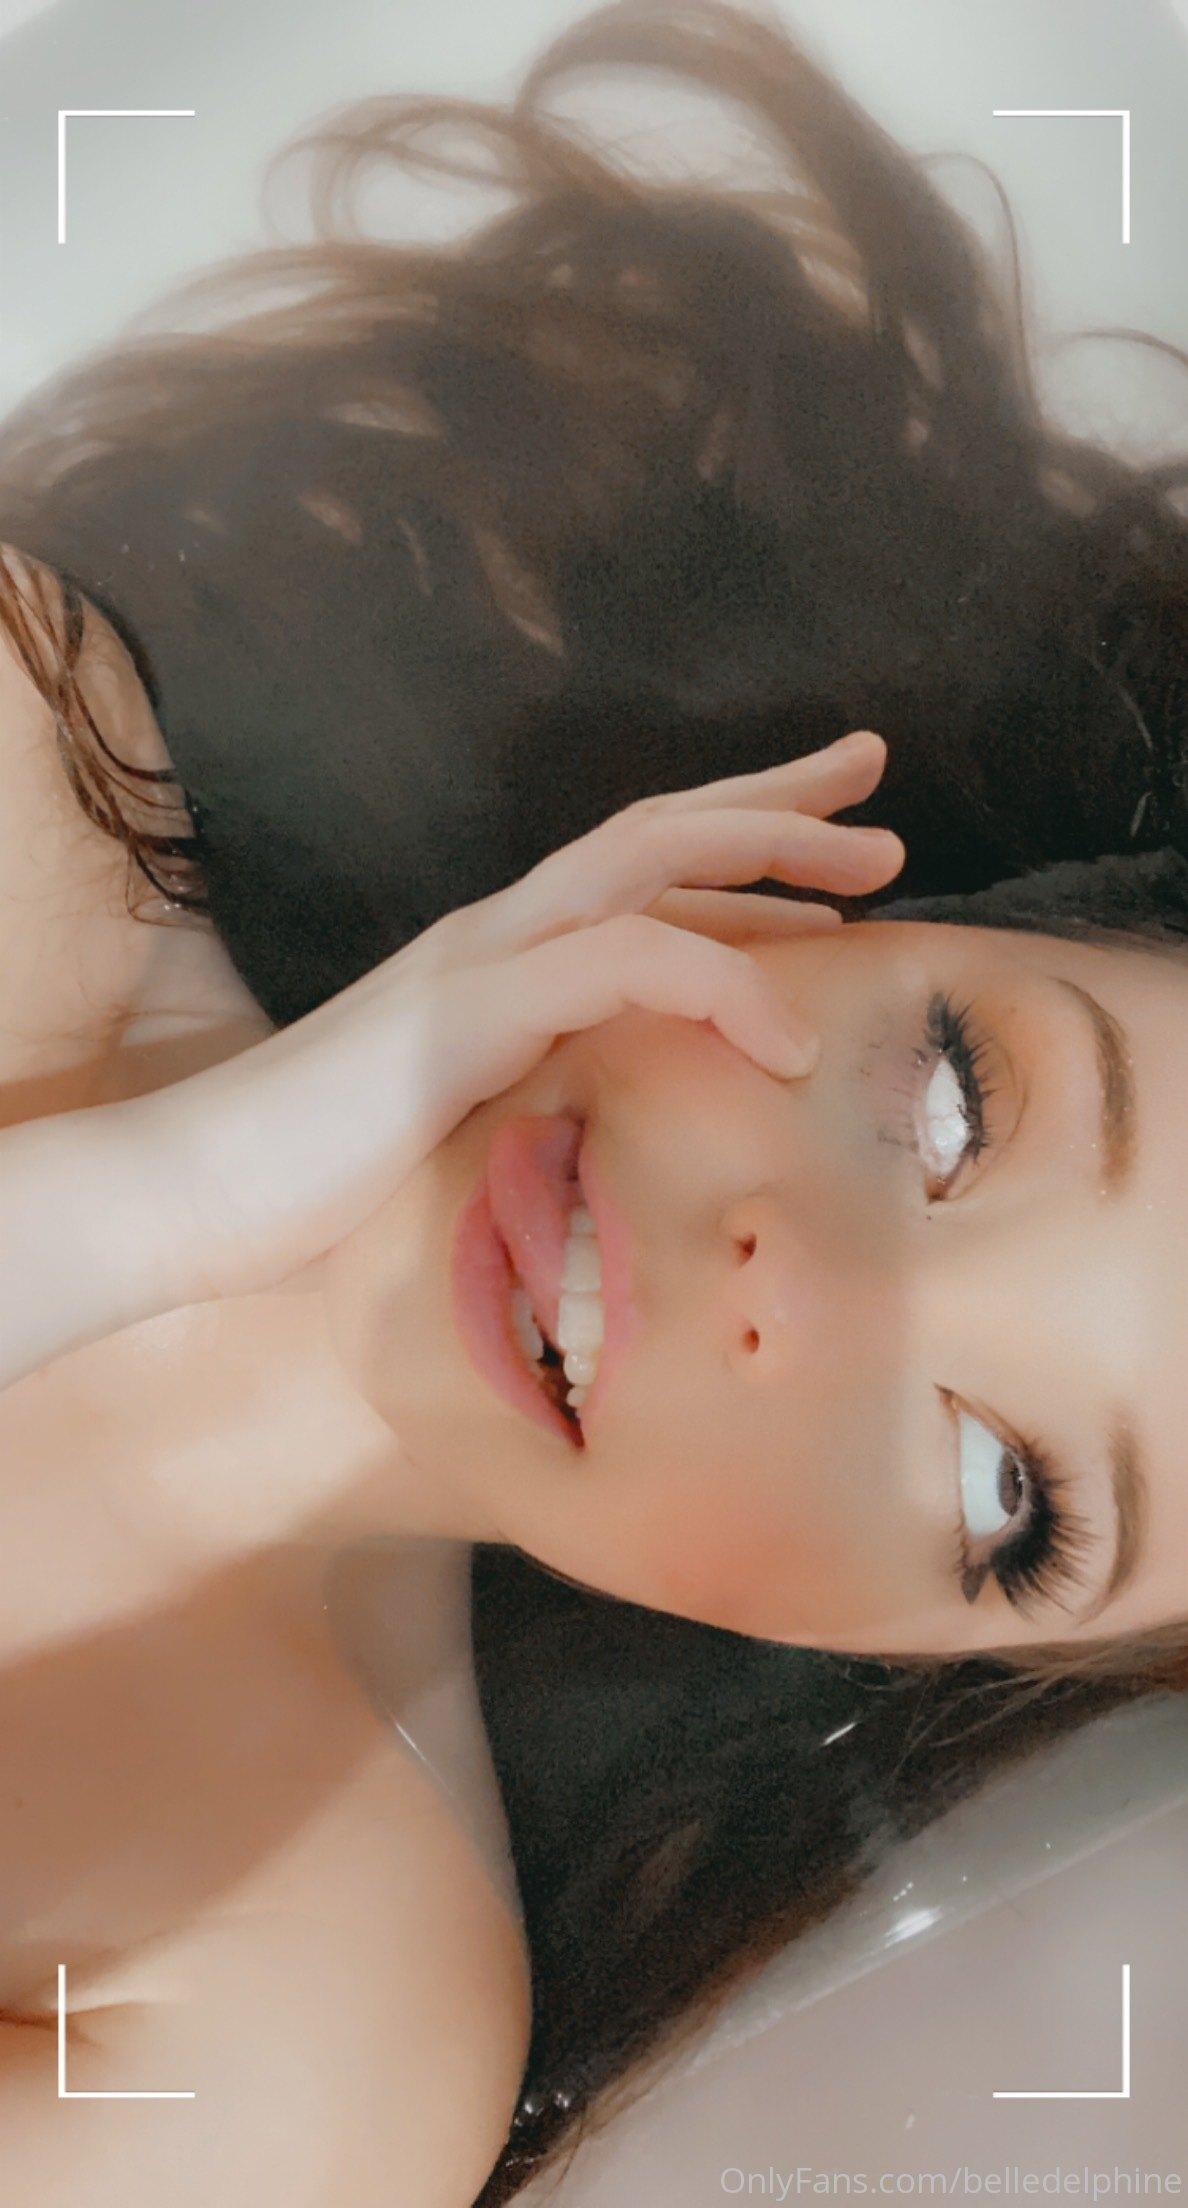 Belle Delphine Nude In Bath With Shoes Onlyfans Set Leaked 0068